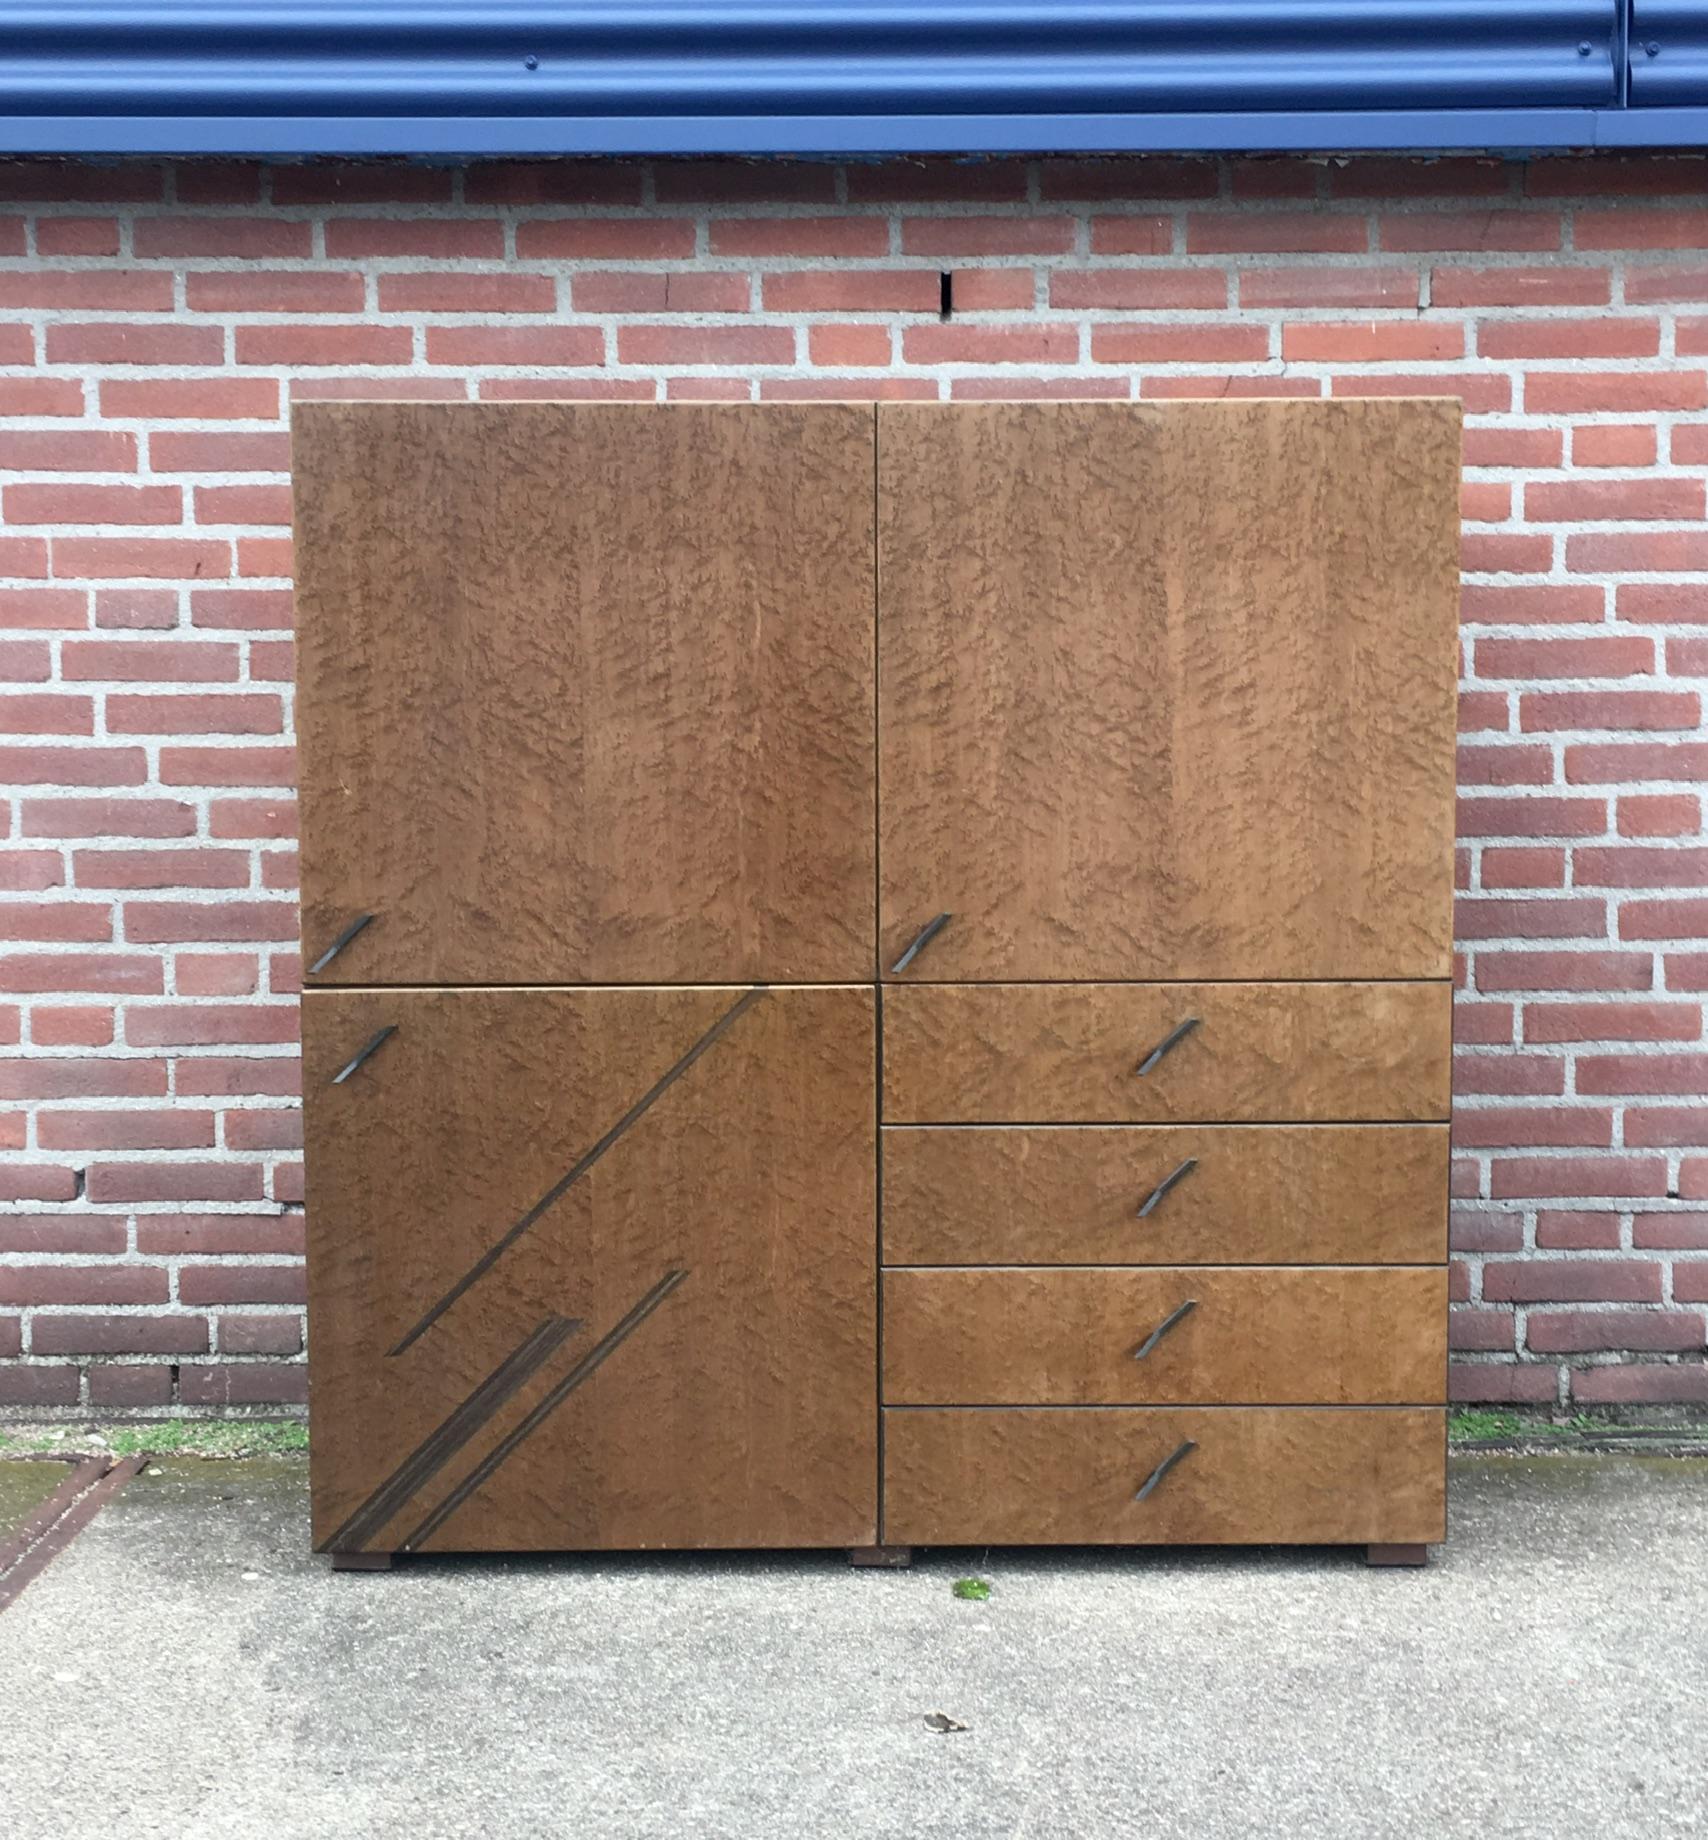 Wonderful Saporiti Higboard, manufactured in Italy. It consists of two pieces, a drawer piece and an upstanding piece with two doors. Both pieces have a shelve Inside. This cabinet remains in good condition but shows overall wear like some scratches